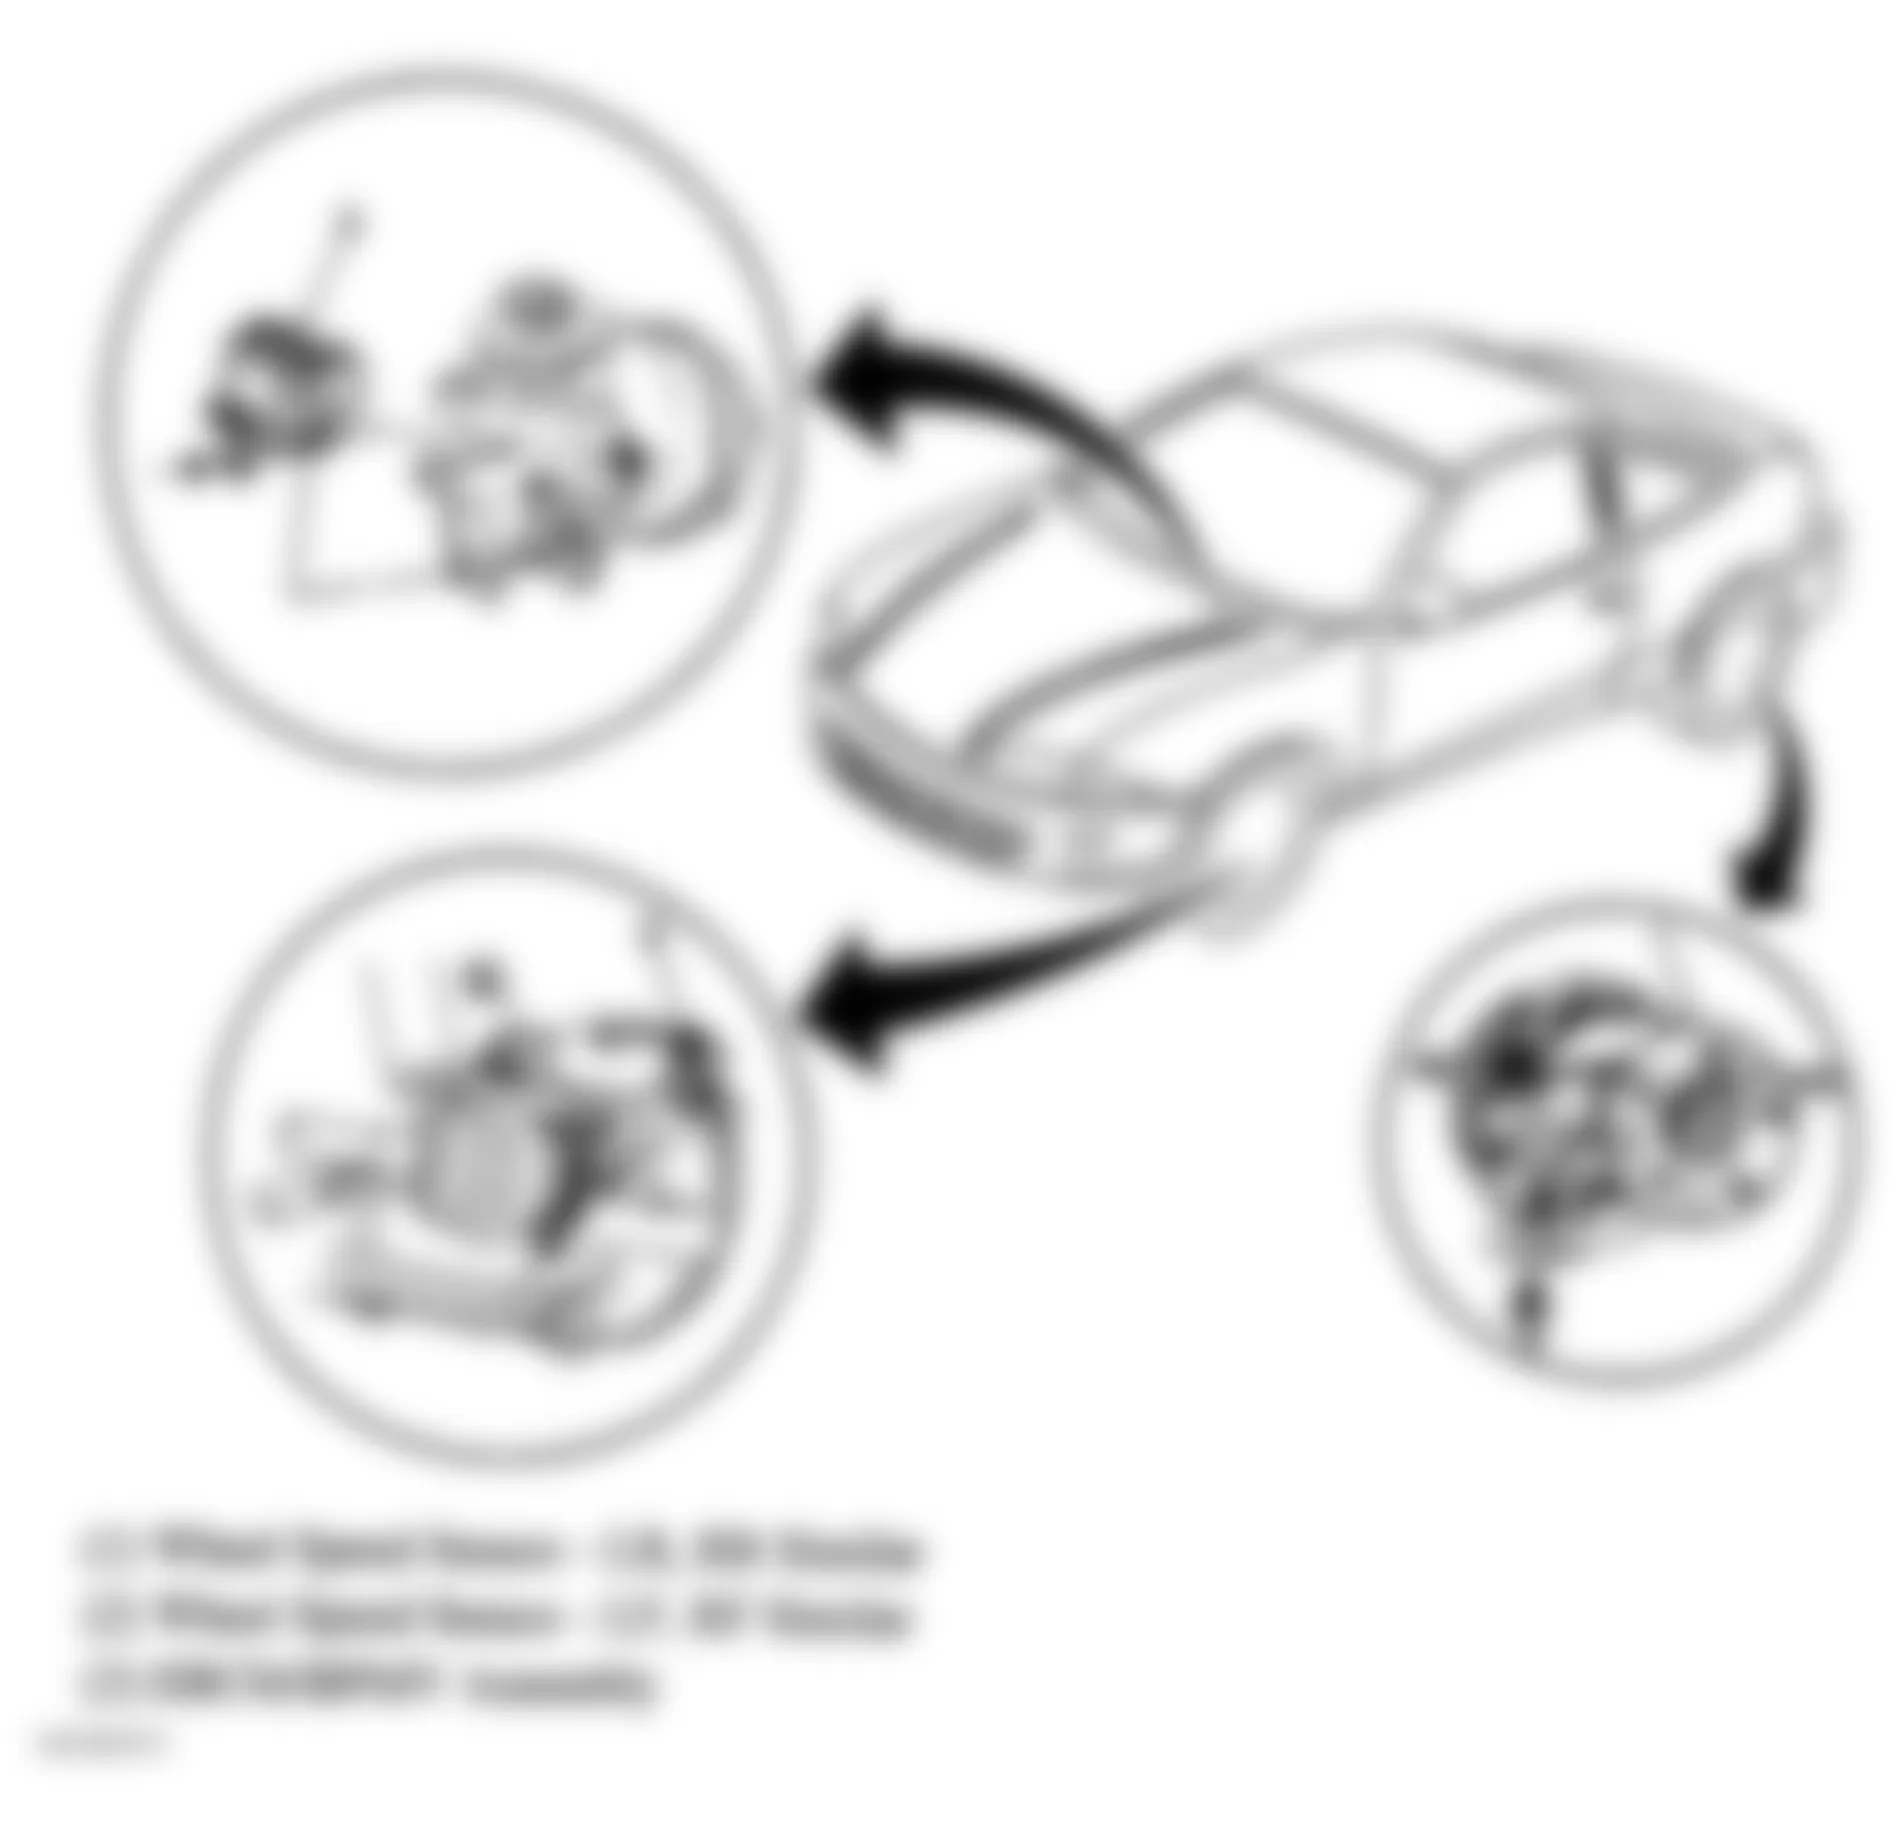 Chevrolet Cavalier 2005 - Component Locations -  Left Front Steering Knuckle, Left Rear Wheel Hub & Left Rear Of Engine Compartment